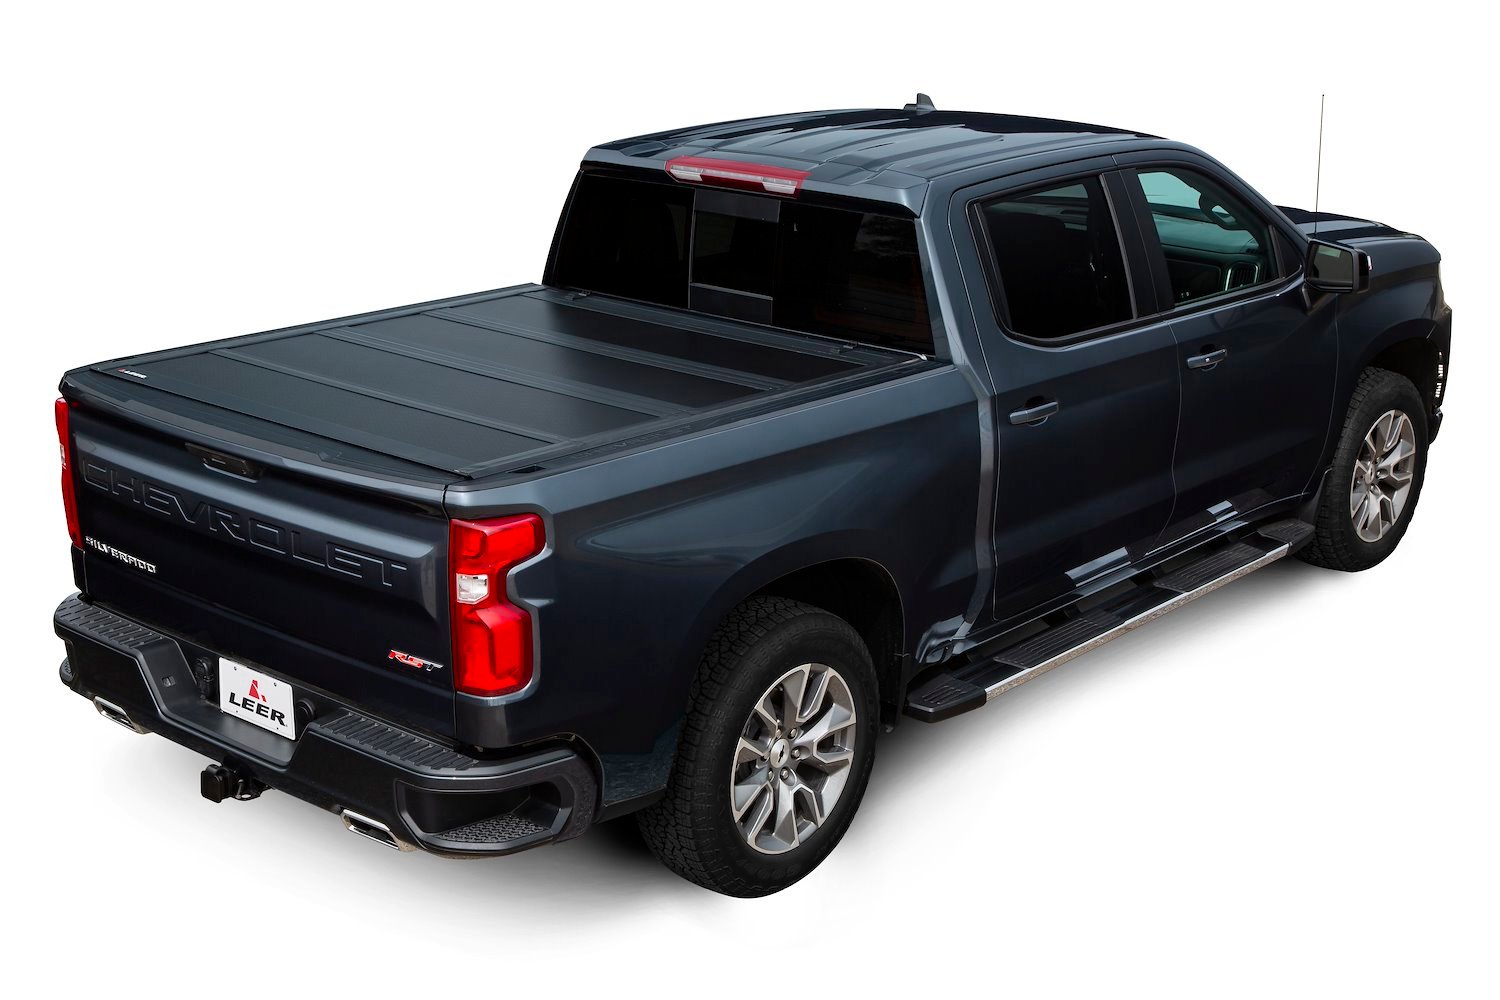 HF650M Hard Quad-Folding Tonneau Cover Fits Select Ram 1500 [Bed Length: 6 ft. 4 in.]